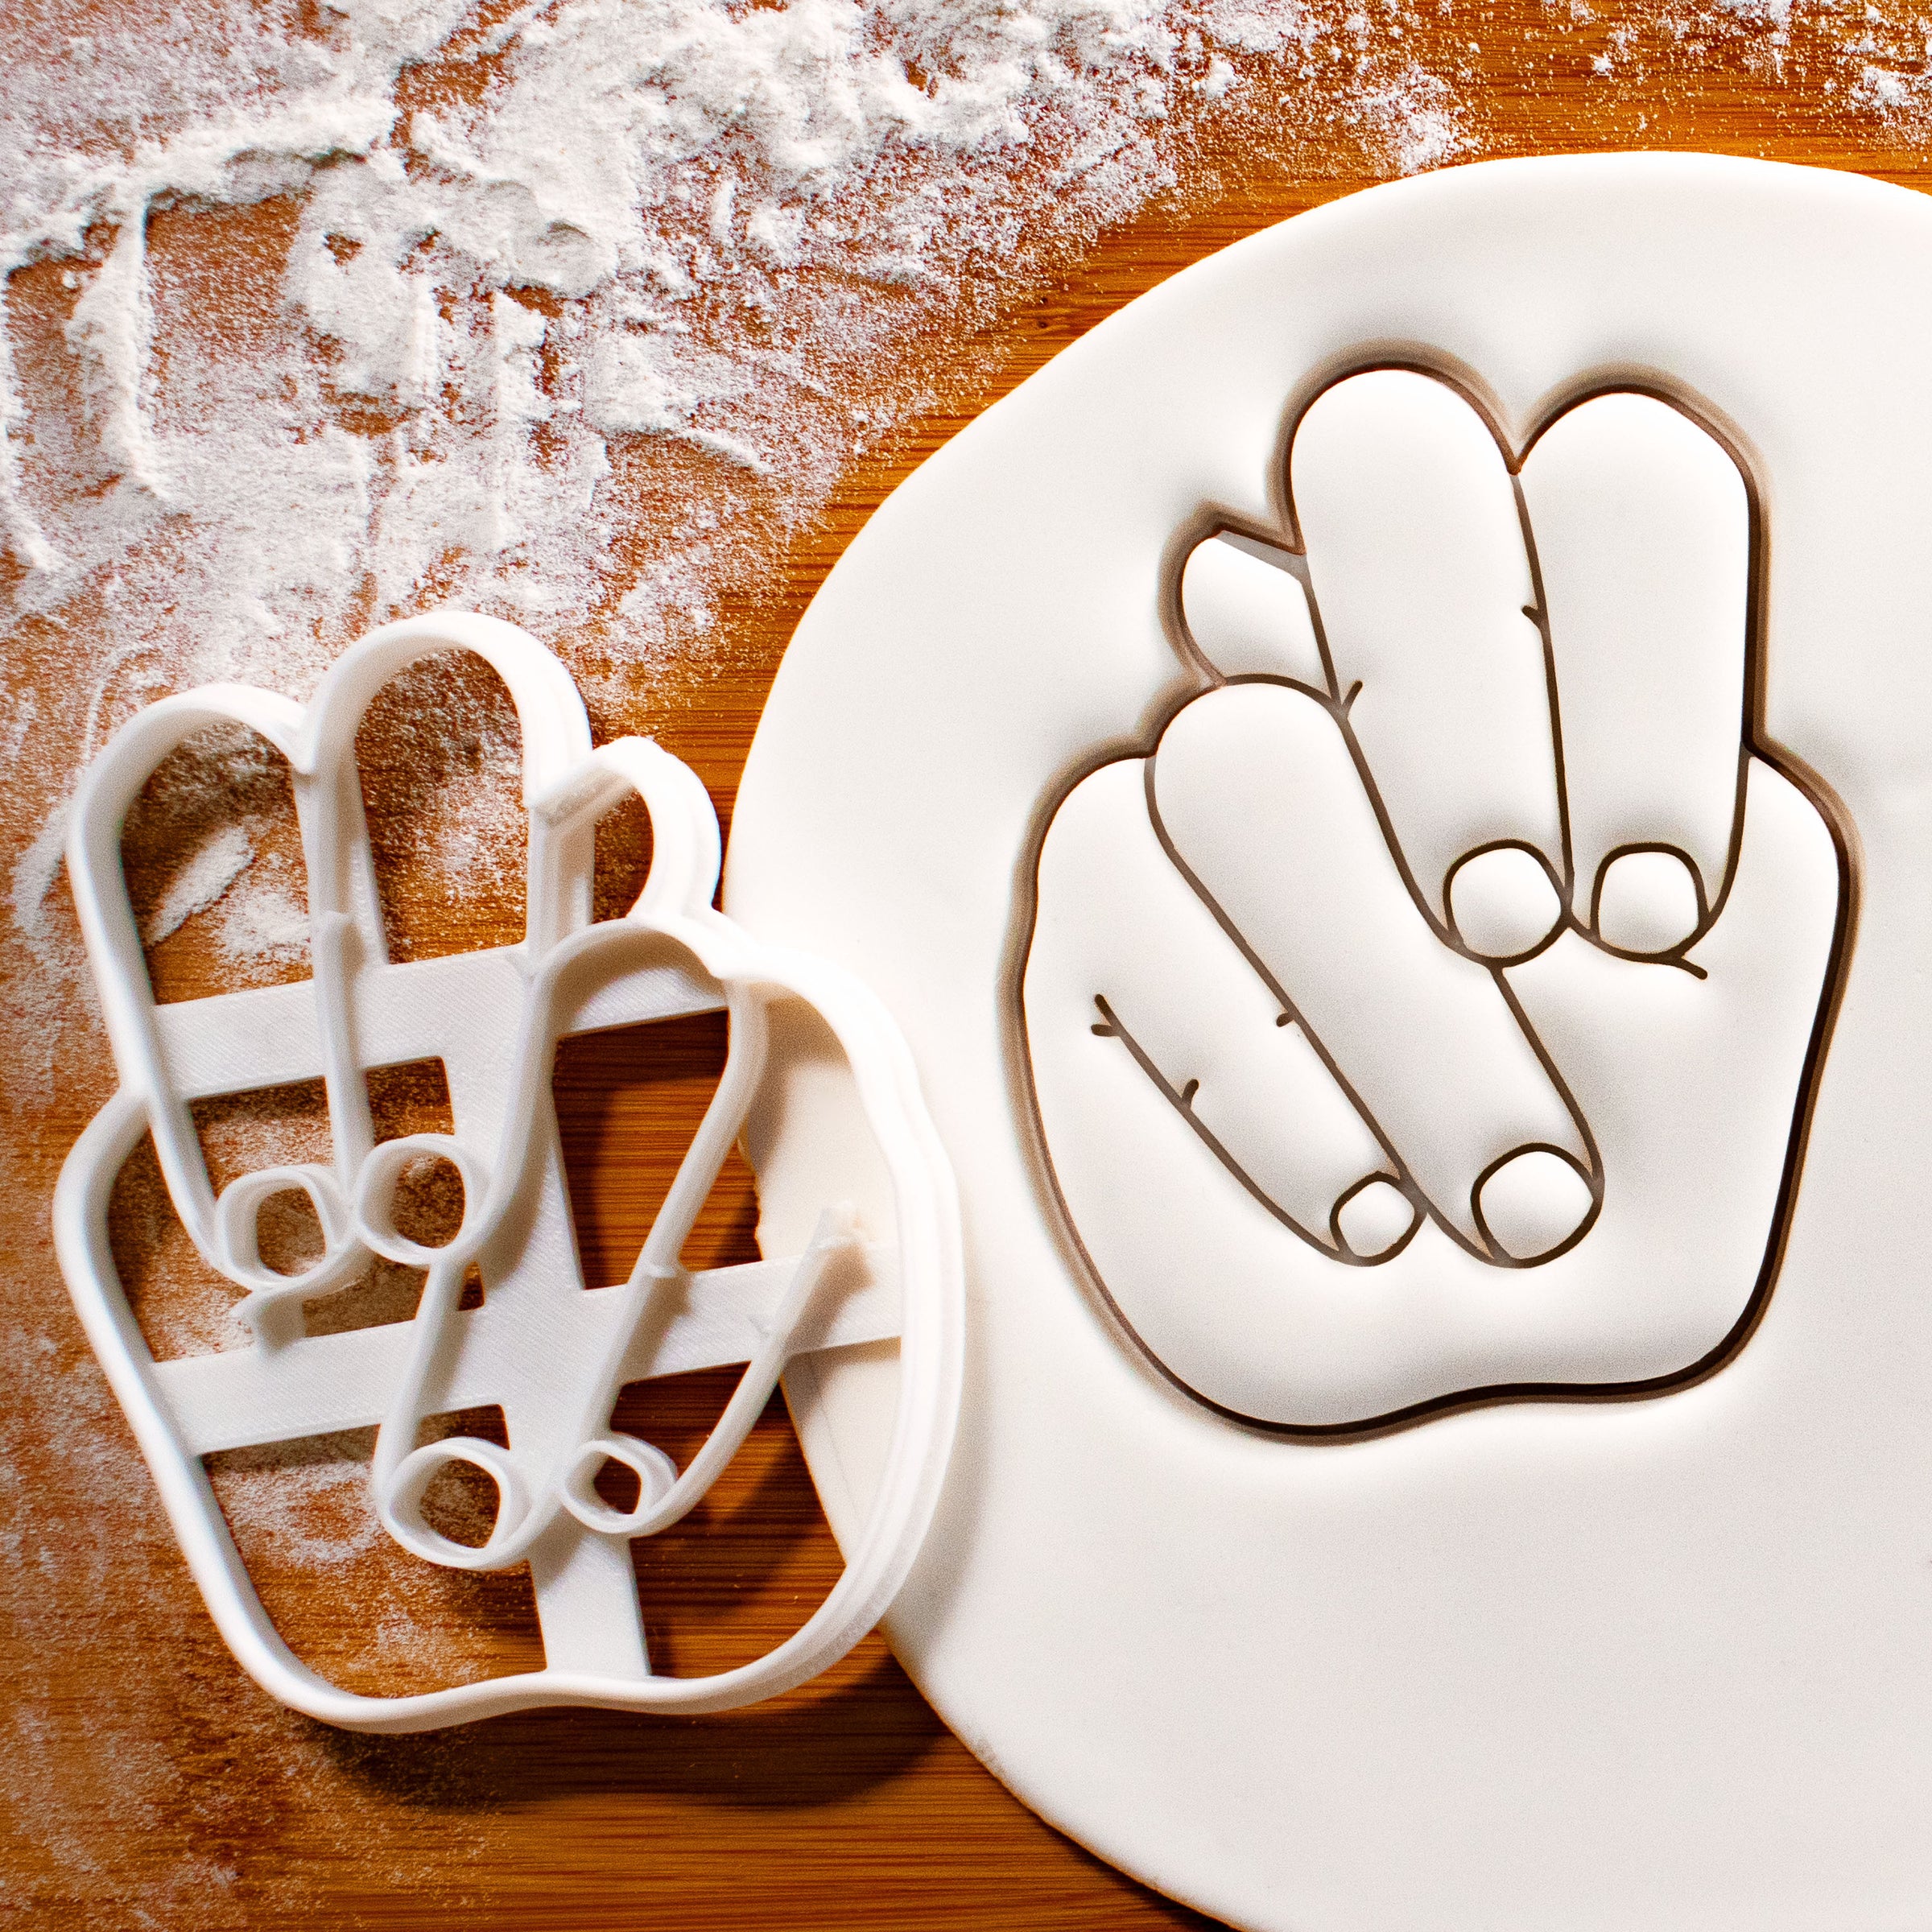 American Sign Language Letter N Cookie Cutter